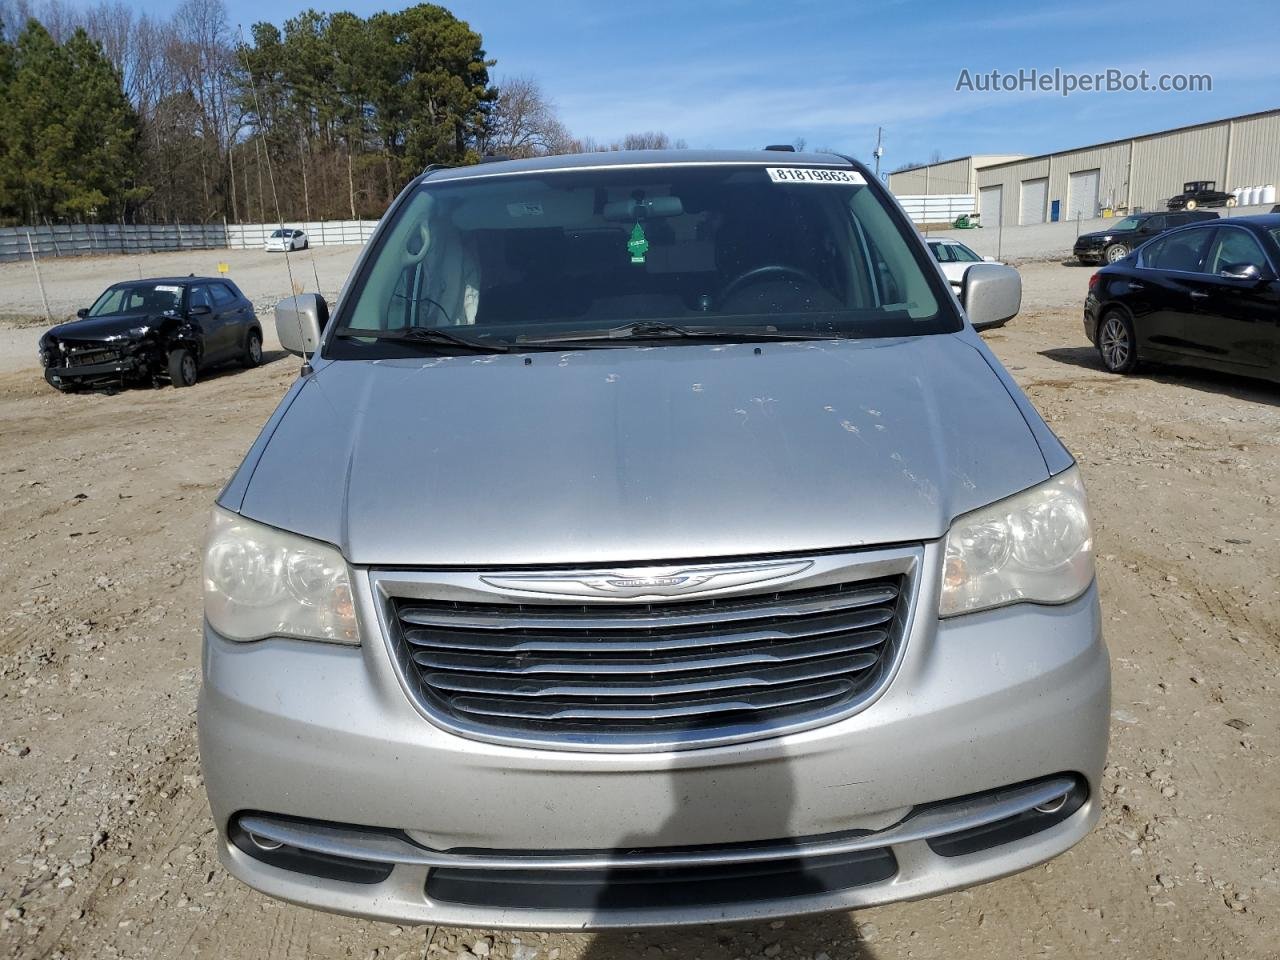 2011 Chrysler Town & Country Touring Silver vin: 2A4RR5DG5BR683639